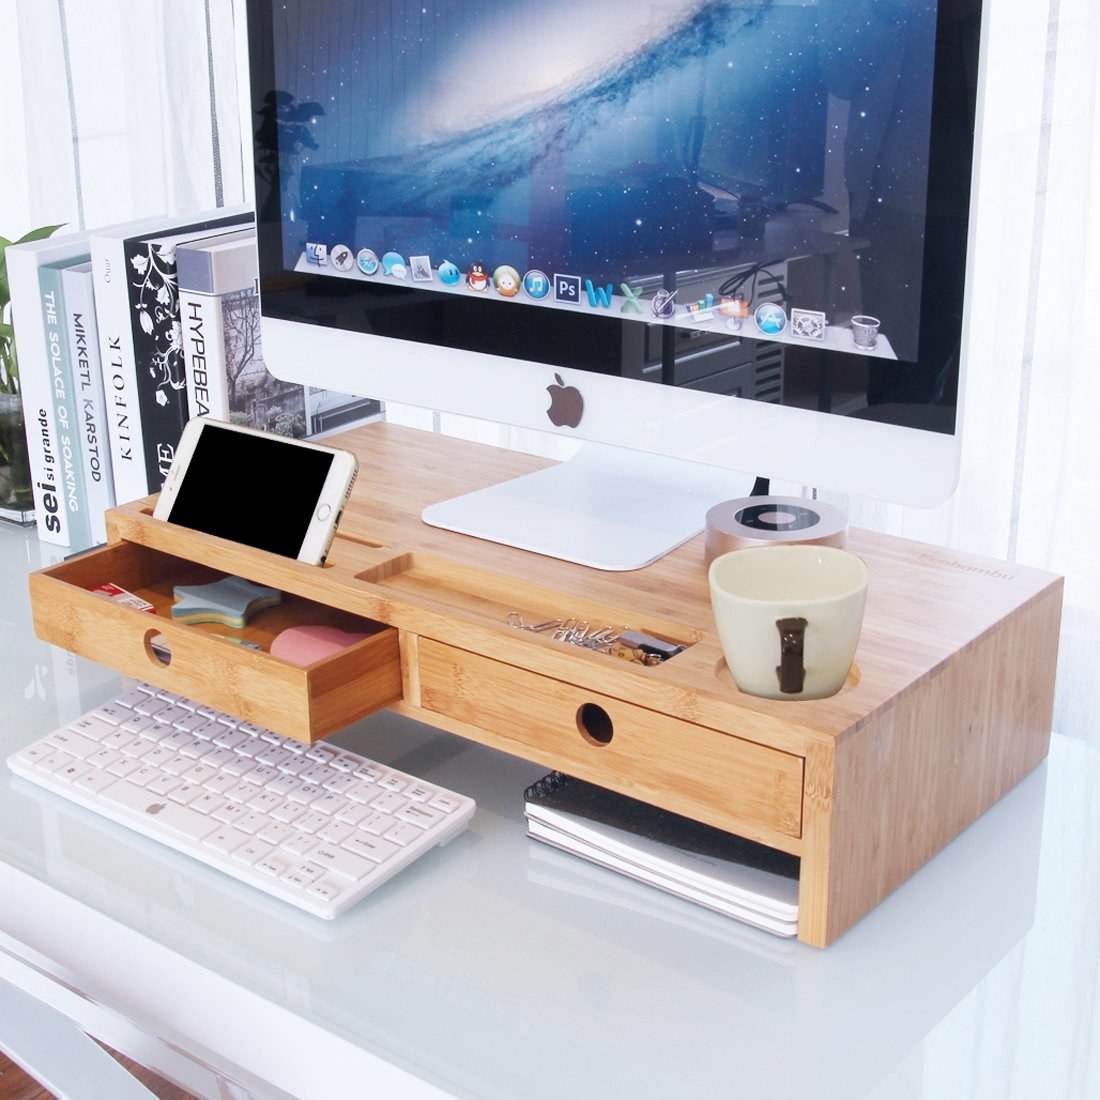 The monitor stand, which is 22 inches long, 10.6 inches deep, and 4.8 inches high; has two drawers, space underneath them for storage, and three slots in the top for organizing